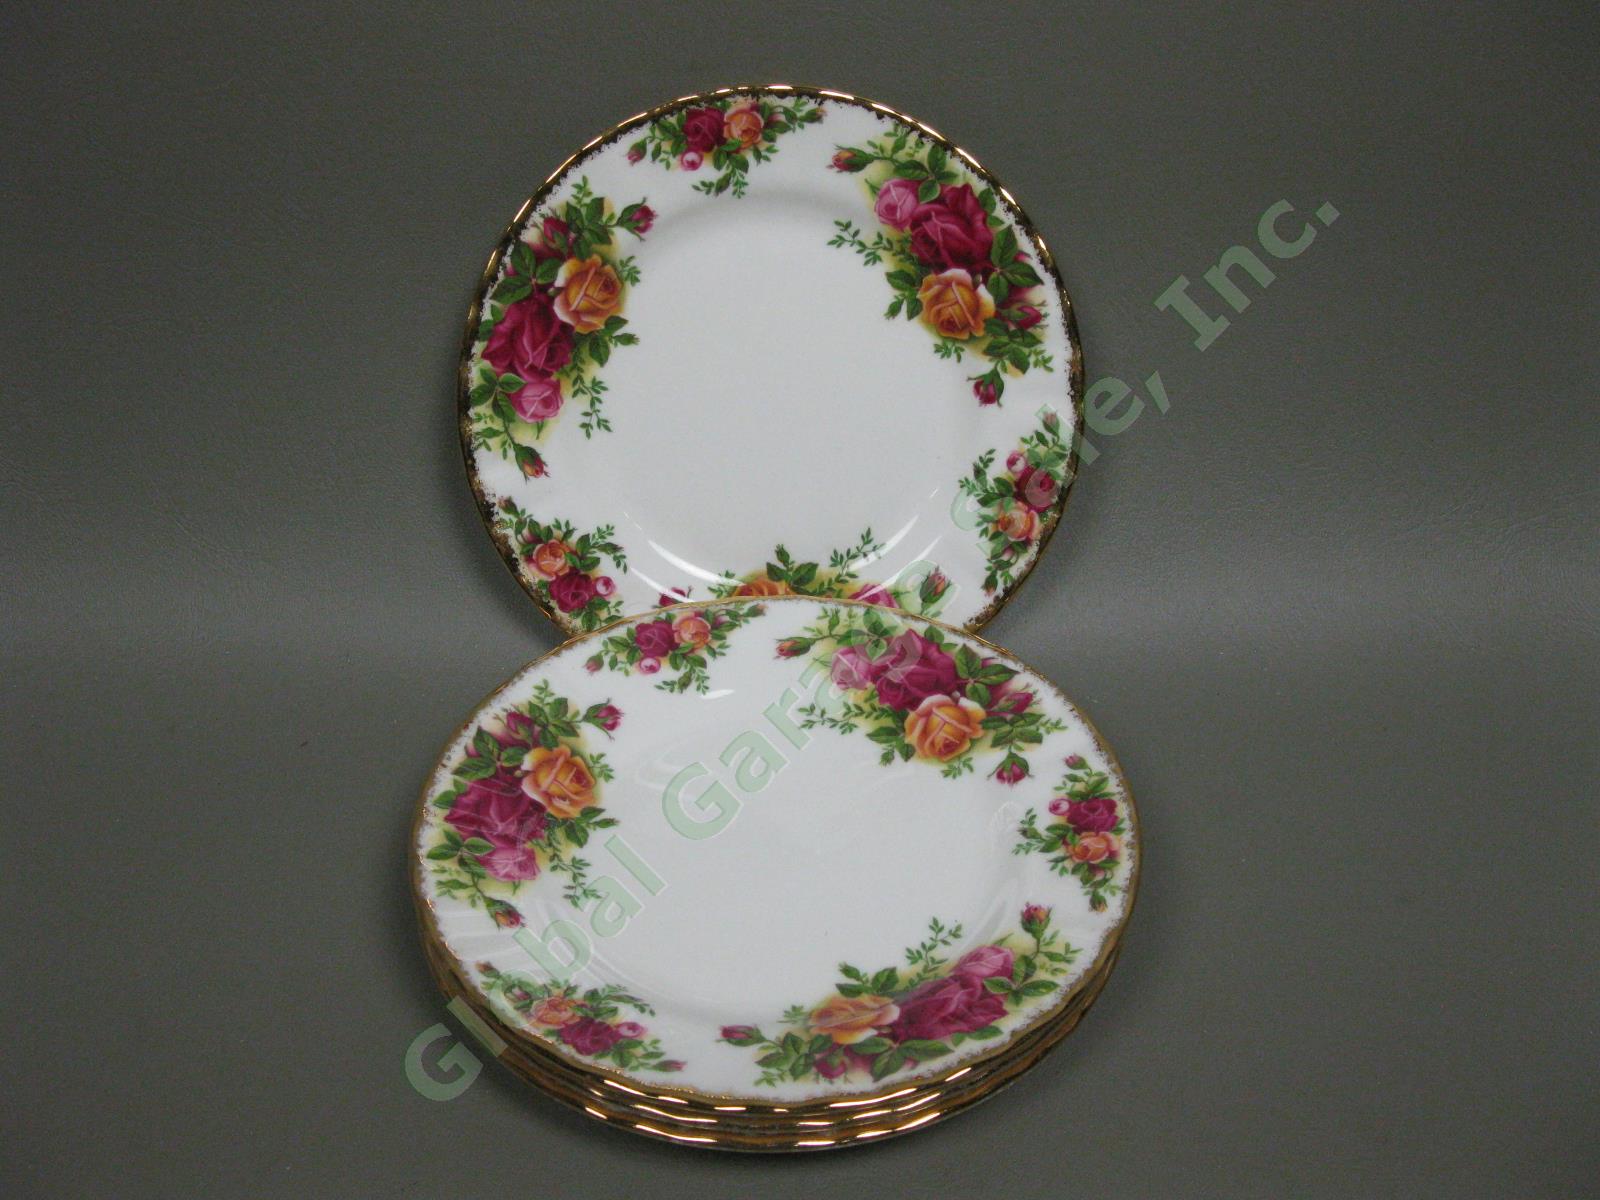 4 Royal Albert Old Country Roses Place Settings Serving Bowl Platter Plate Set 6